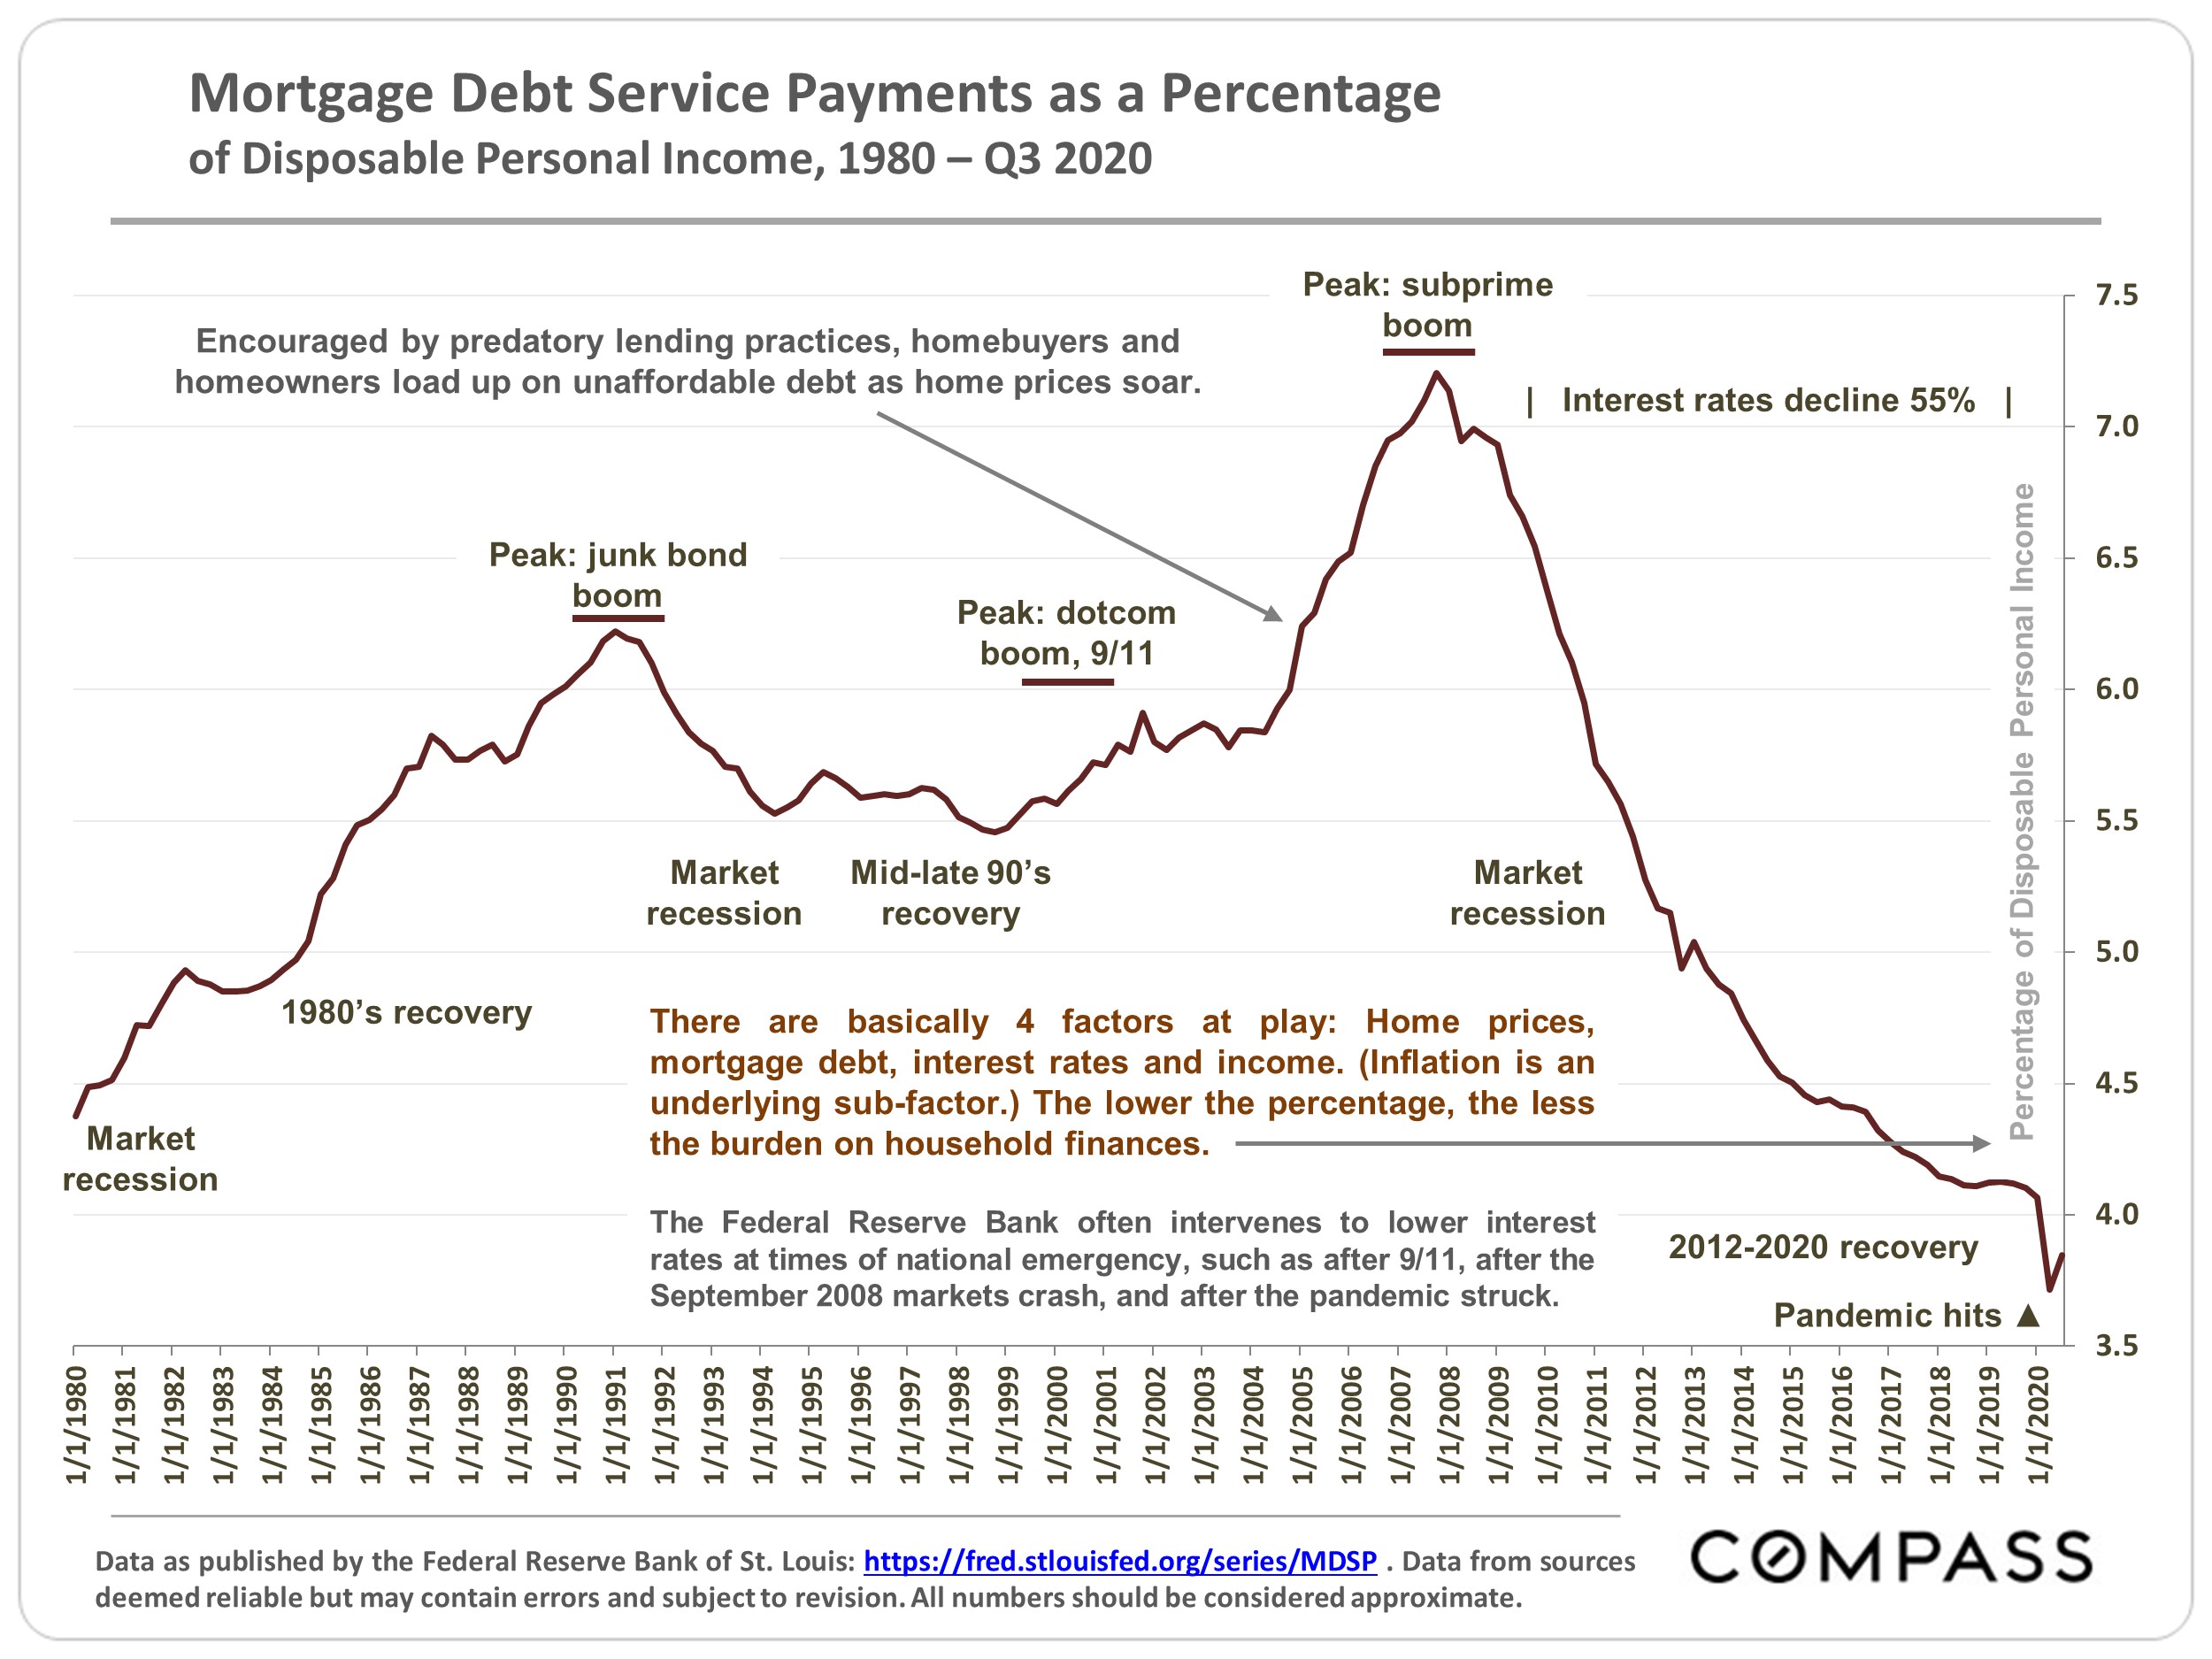 Mortgage Debt Service Payments as a Percentage